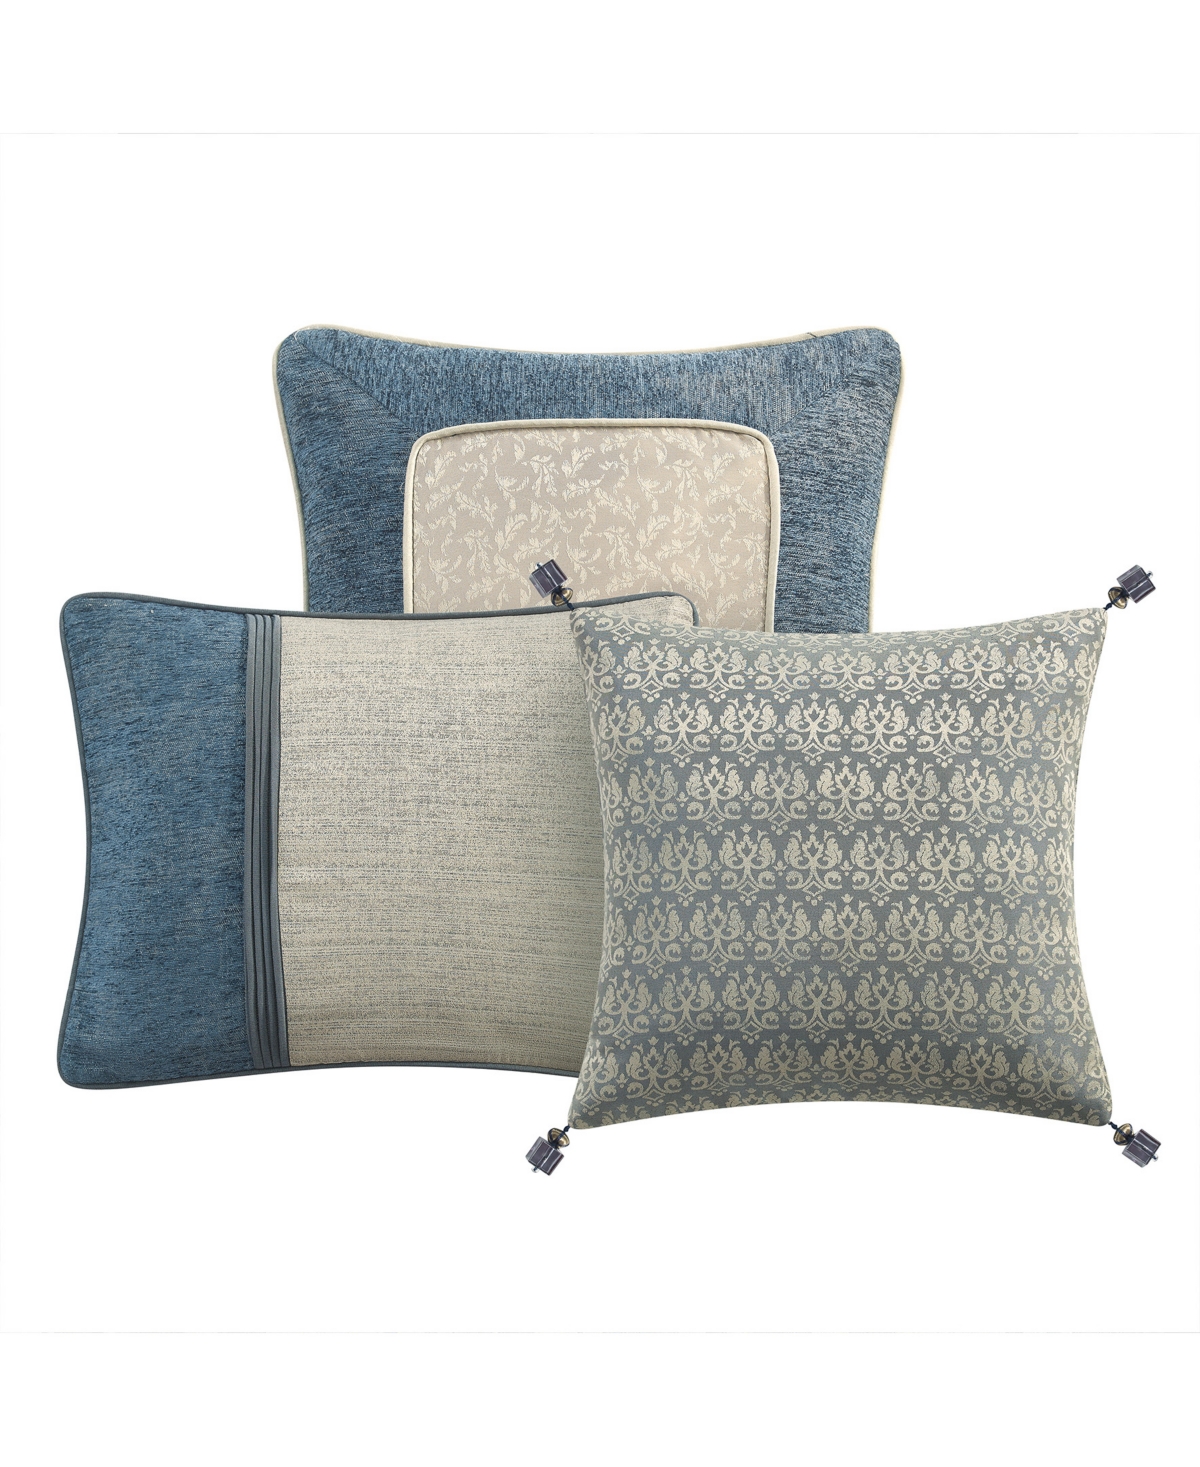 Shop Waterford Everett 3 Piece Decorative Pillows Set In Teal